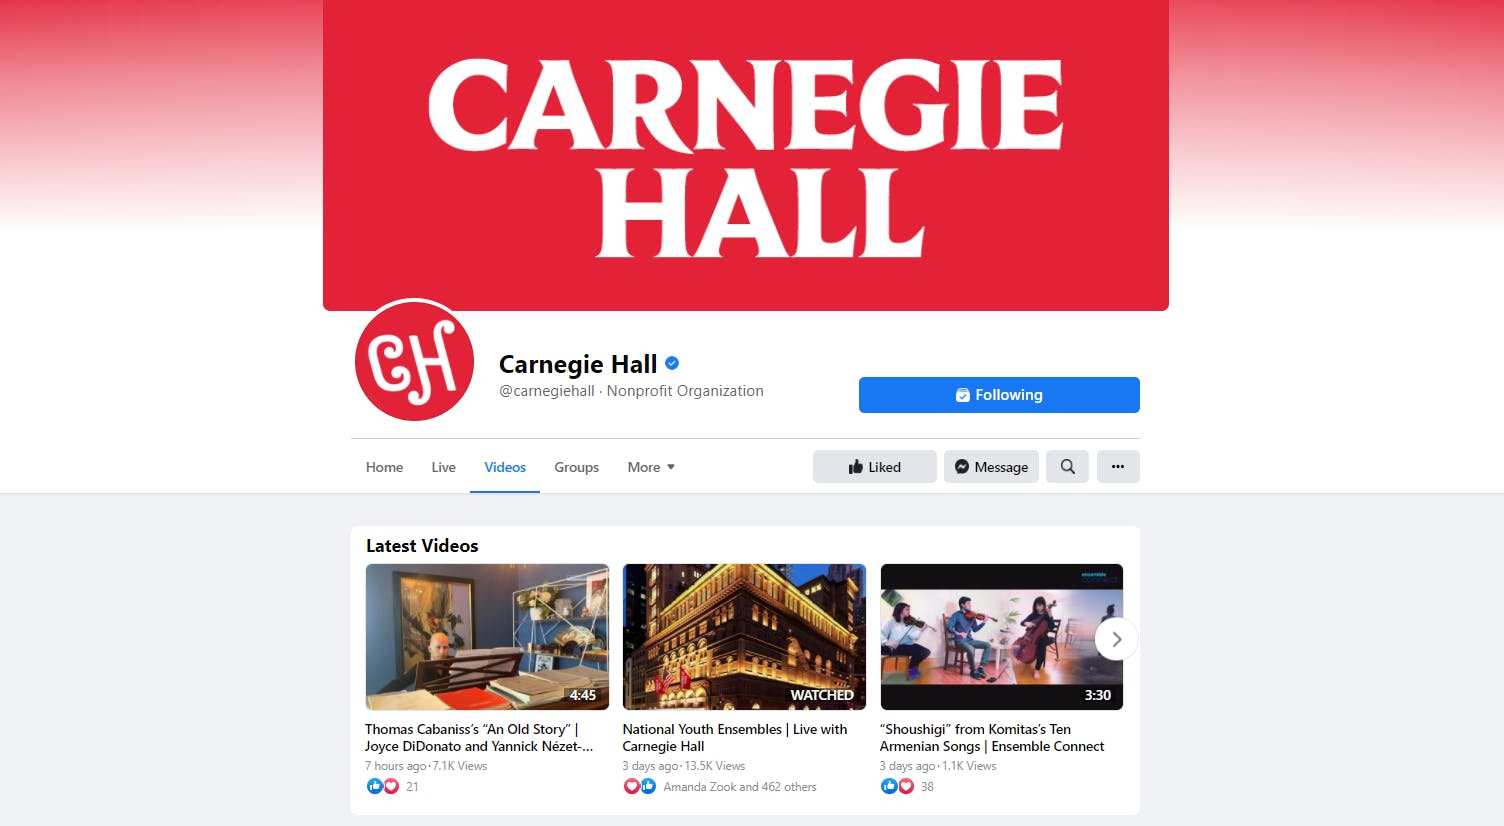 How to Watch Video on Demand Carnegie Hall